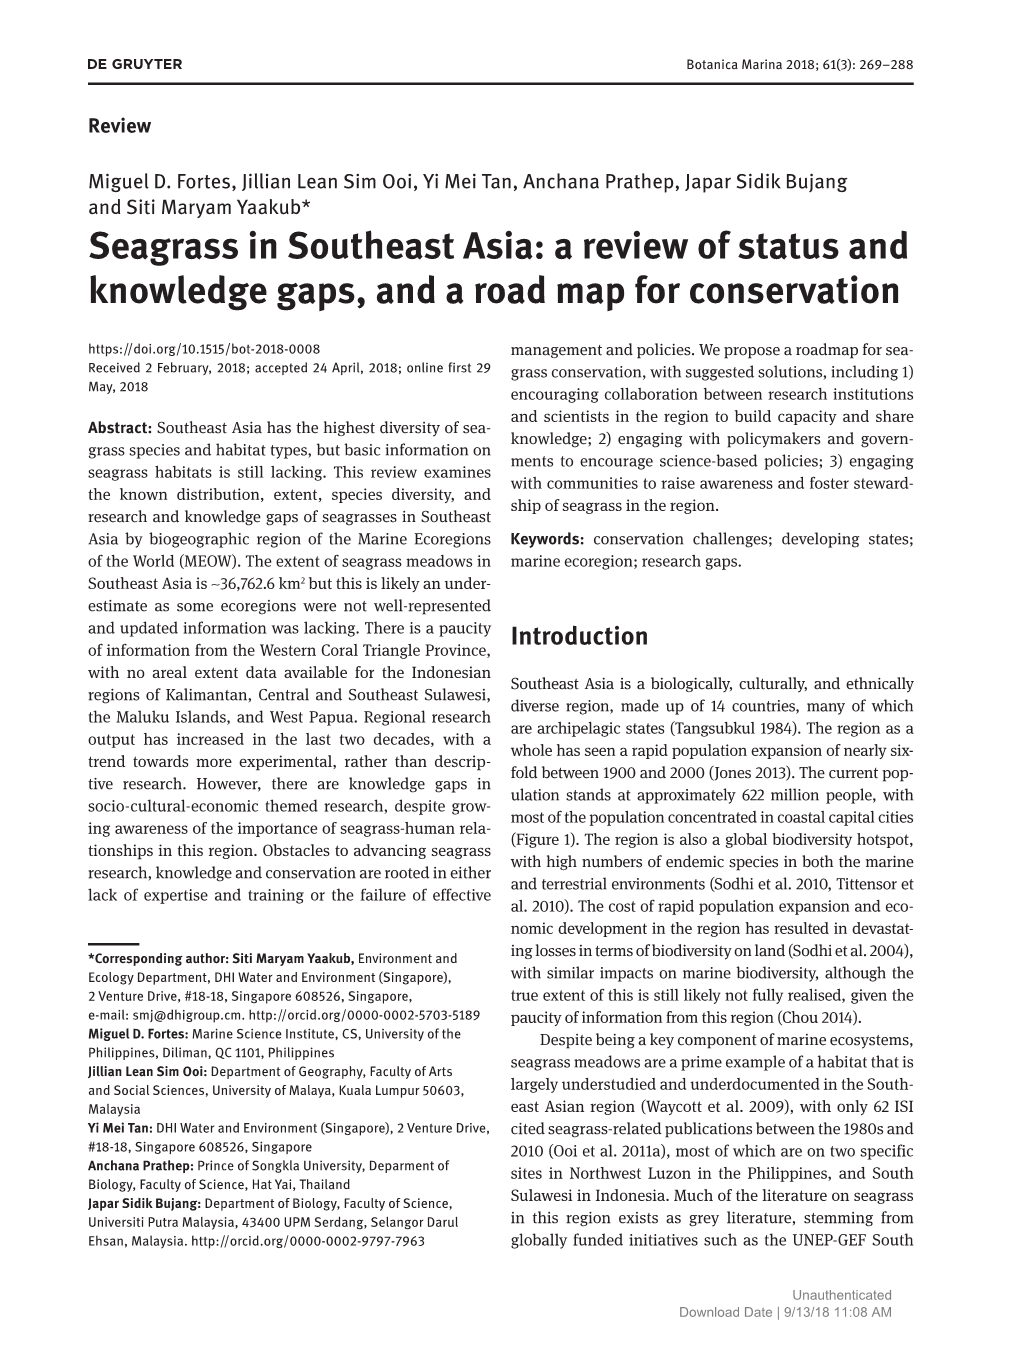 Seagrass in Southeast Asia: a Review of Status and Knowledge Gaps, and a Road Map for Conservation Management and Policies